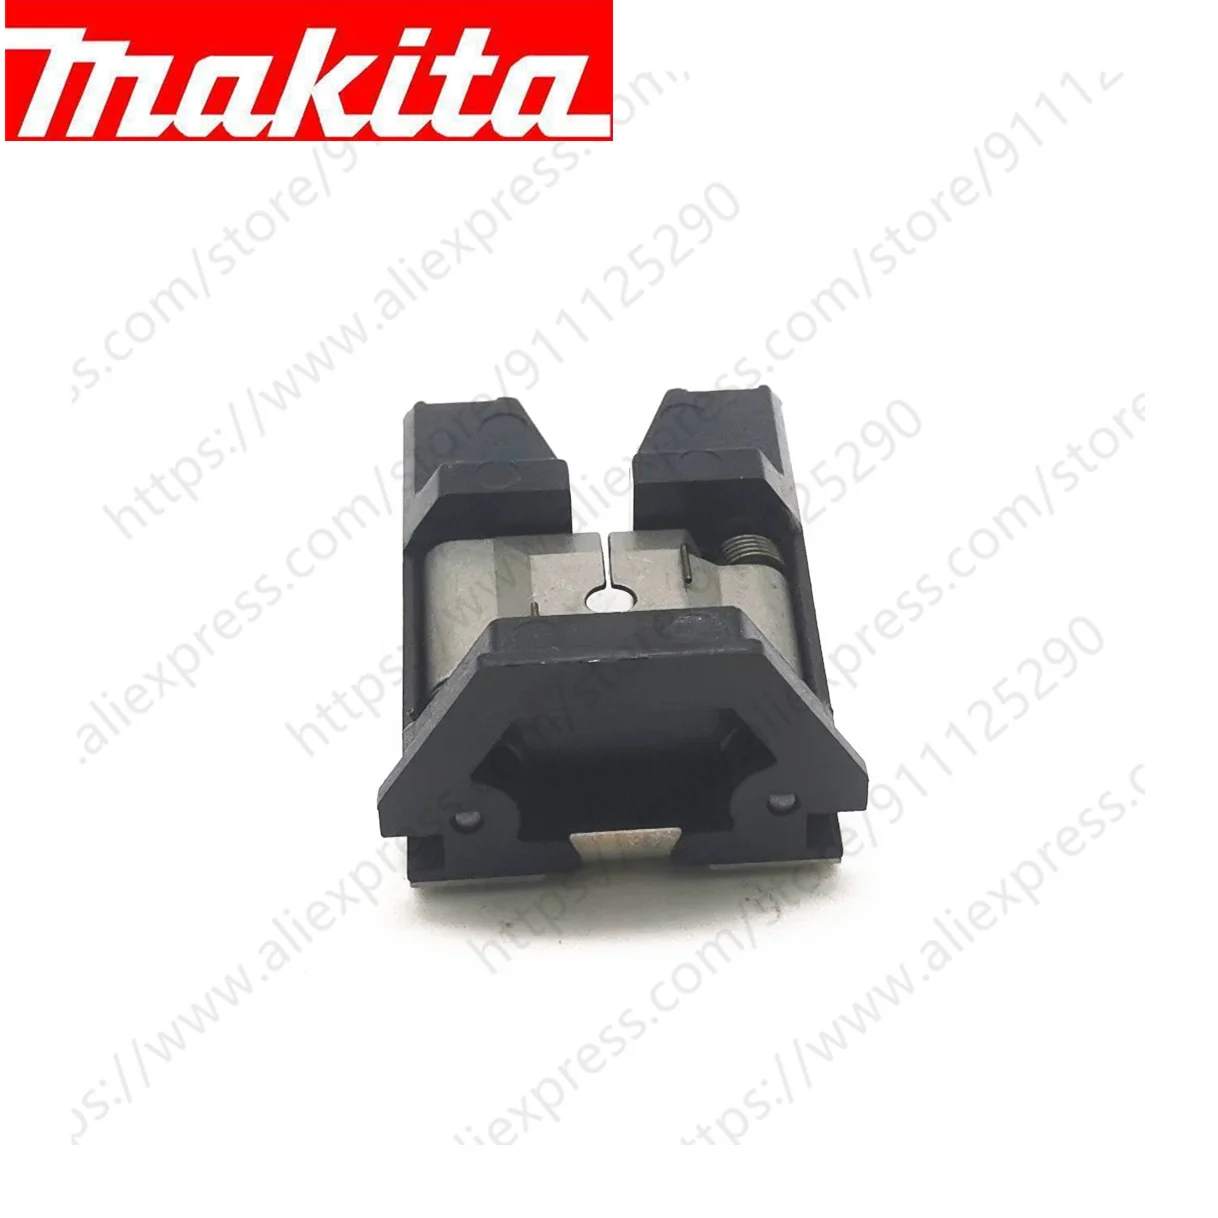 Guide box assembly for Makita DFR750 BFR750 _ - AliExpress Mobile